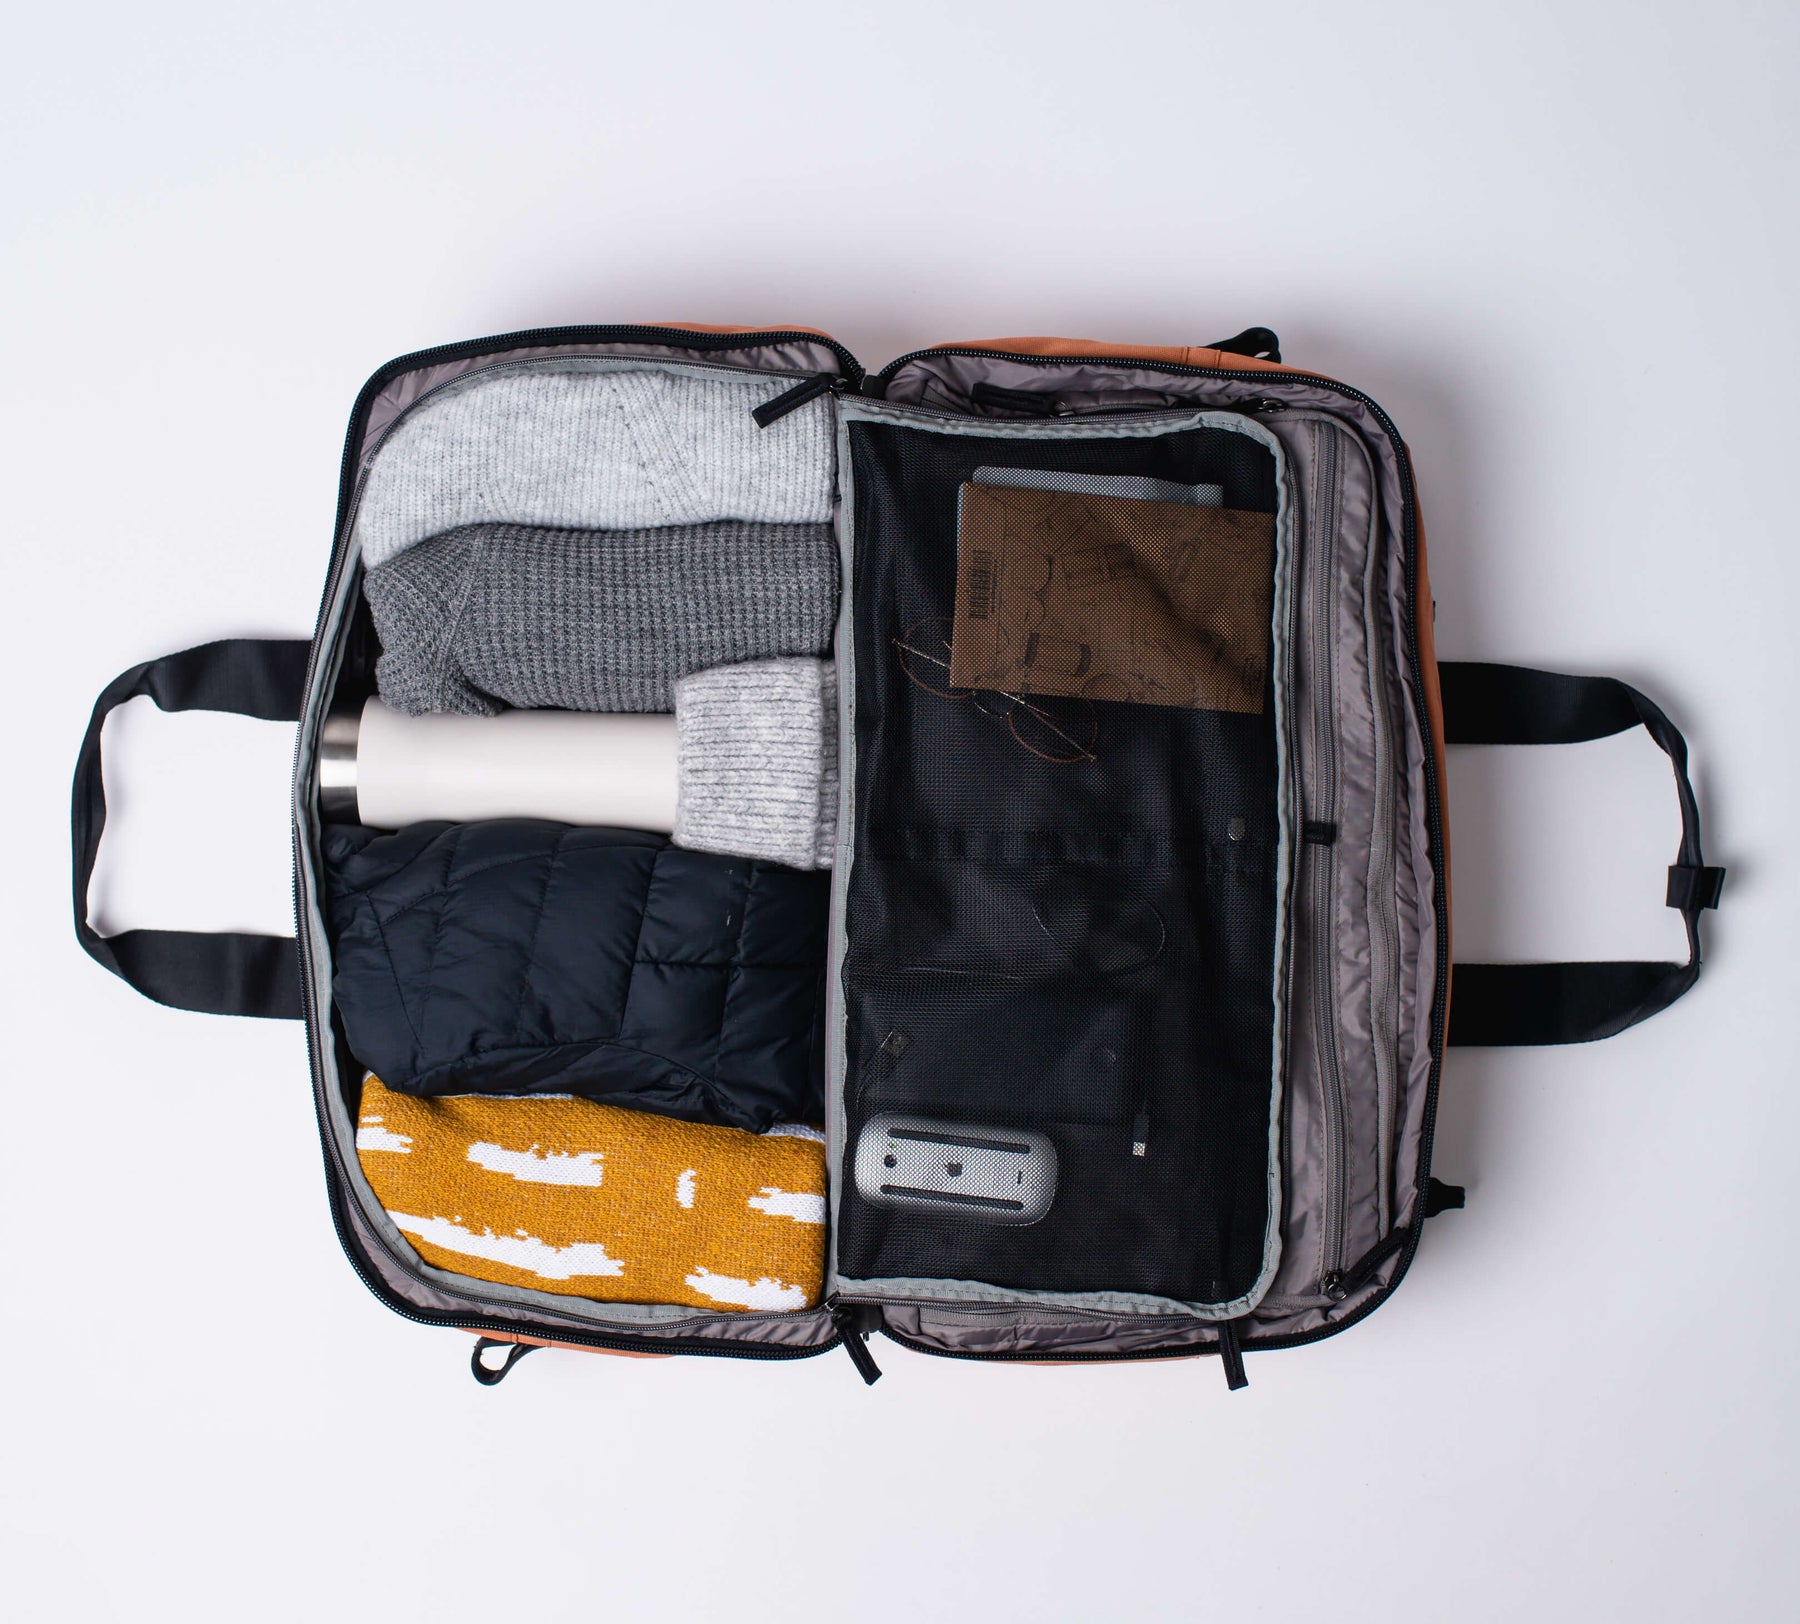 each side of the 50L backpack/duffel can be packed with clothing and other travel essentials